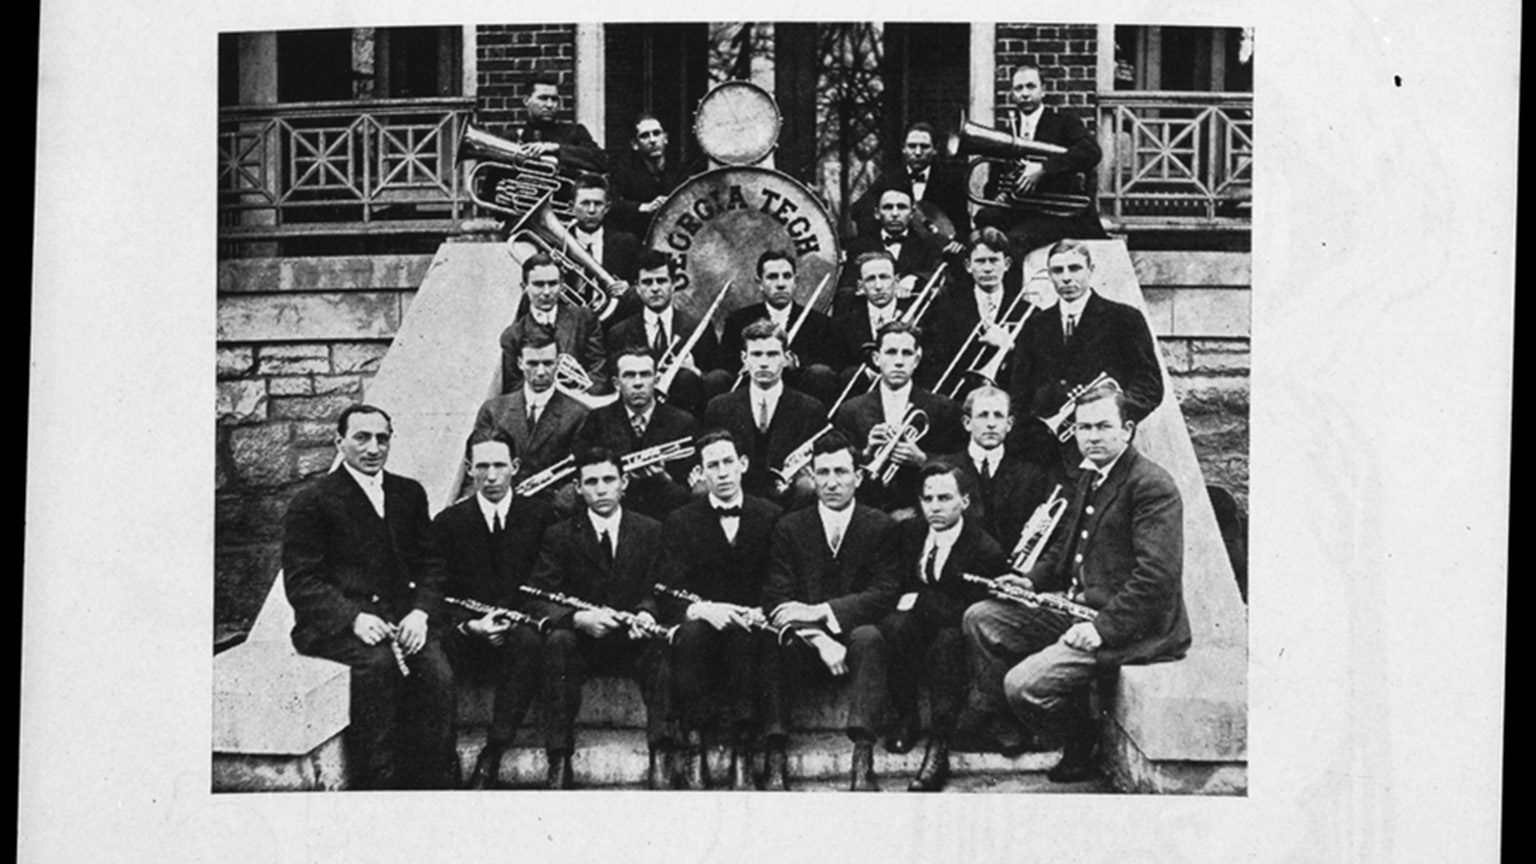 Members of the band posing on steps with their instruments while wearing dark suits.